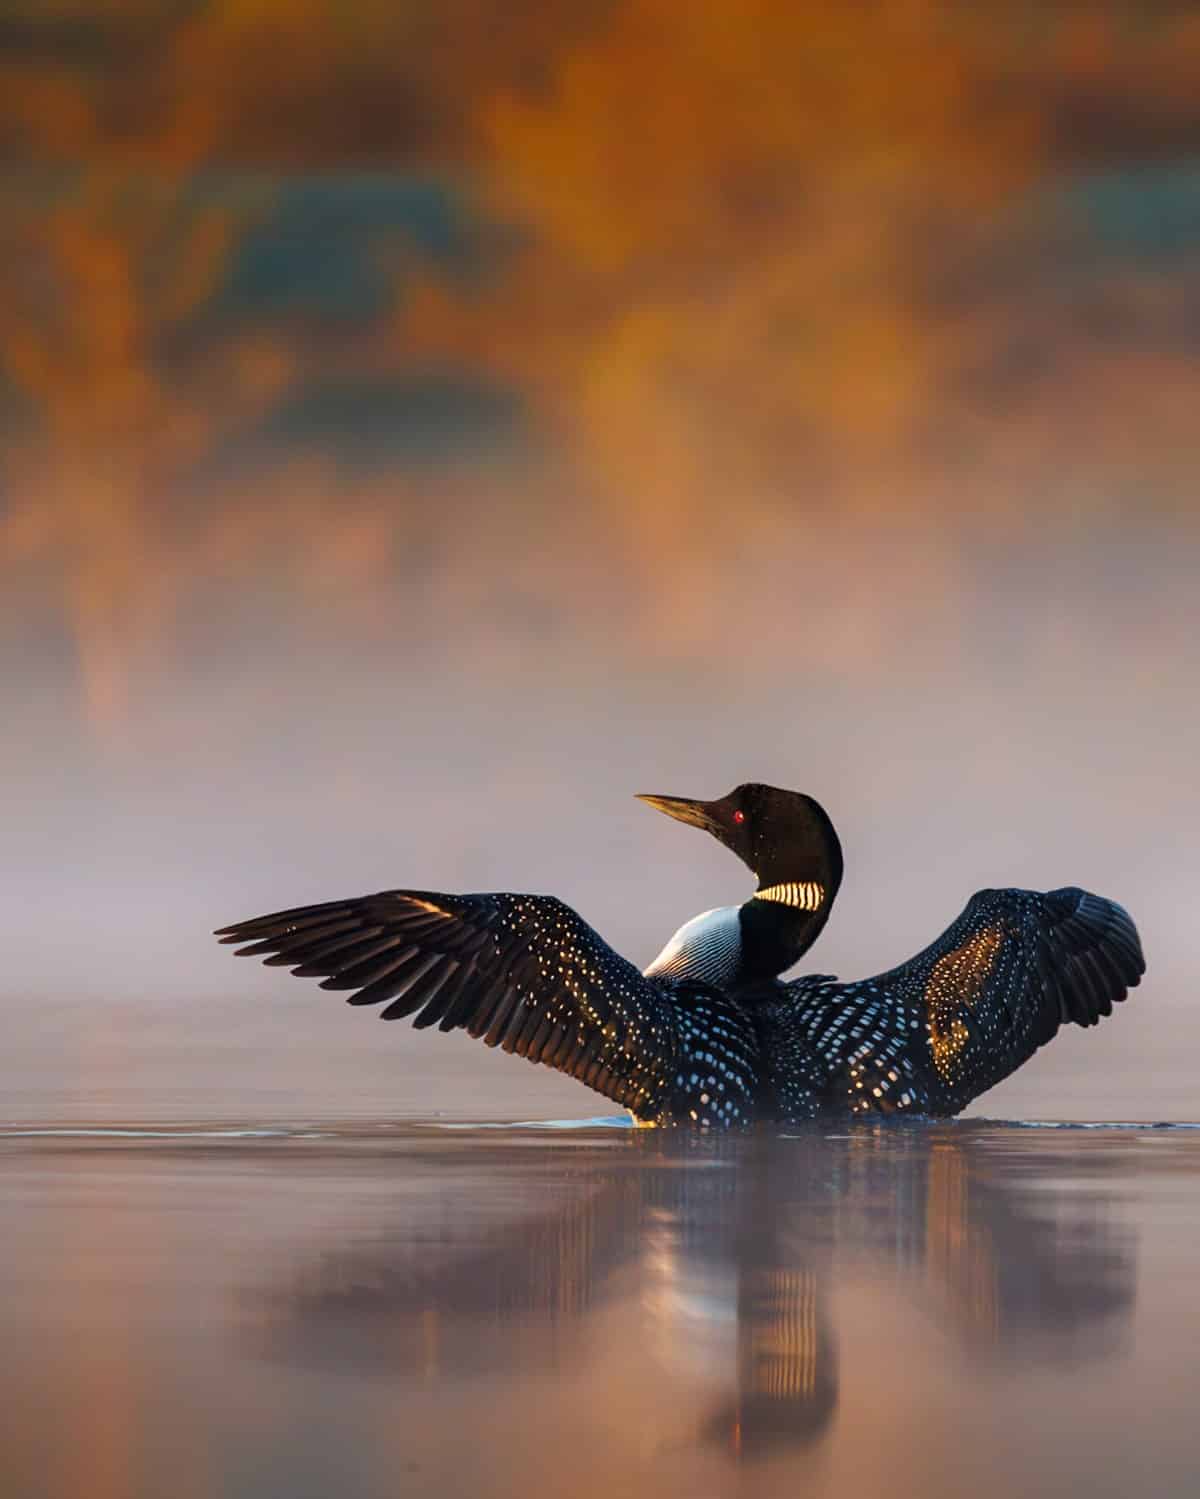 Loon shaking water from its feathers as it sits on a lake